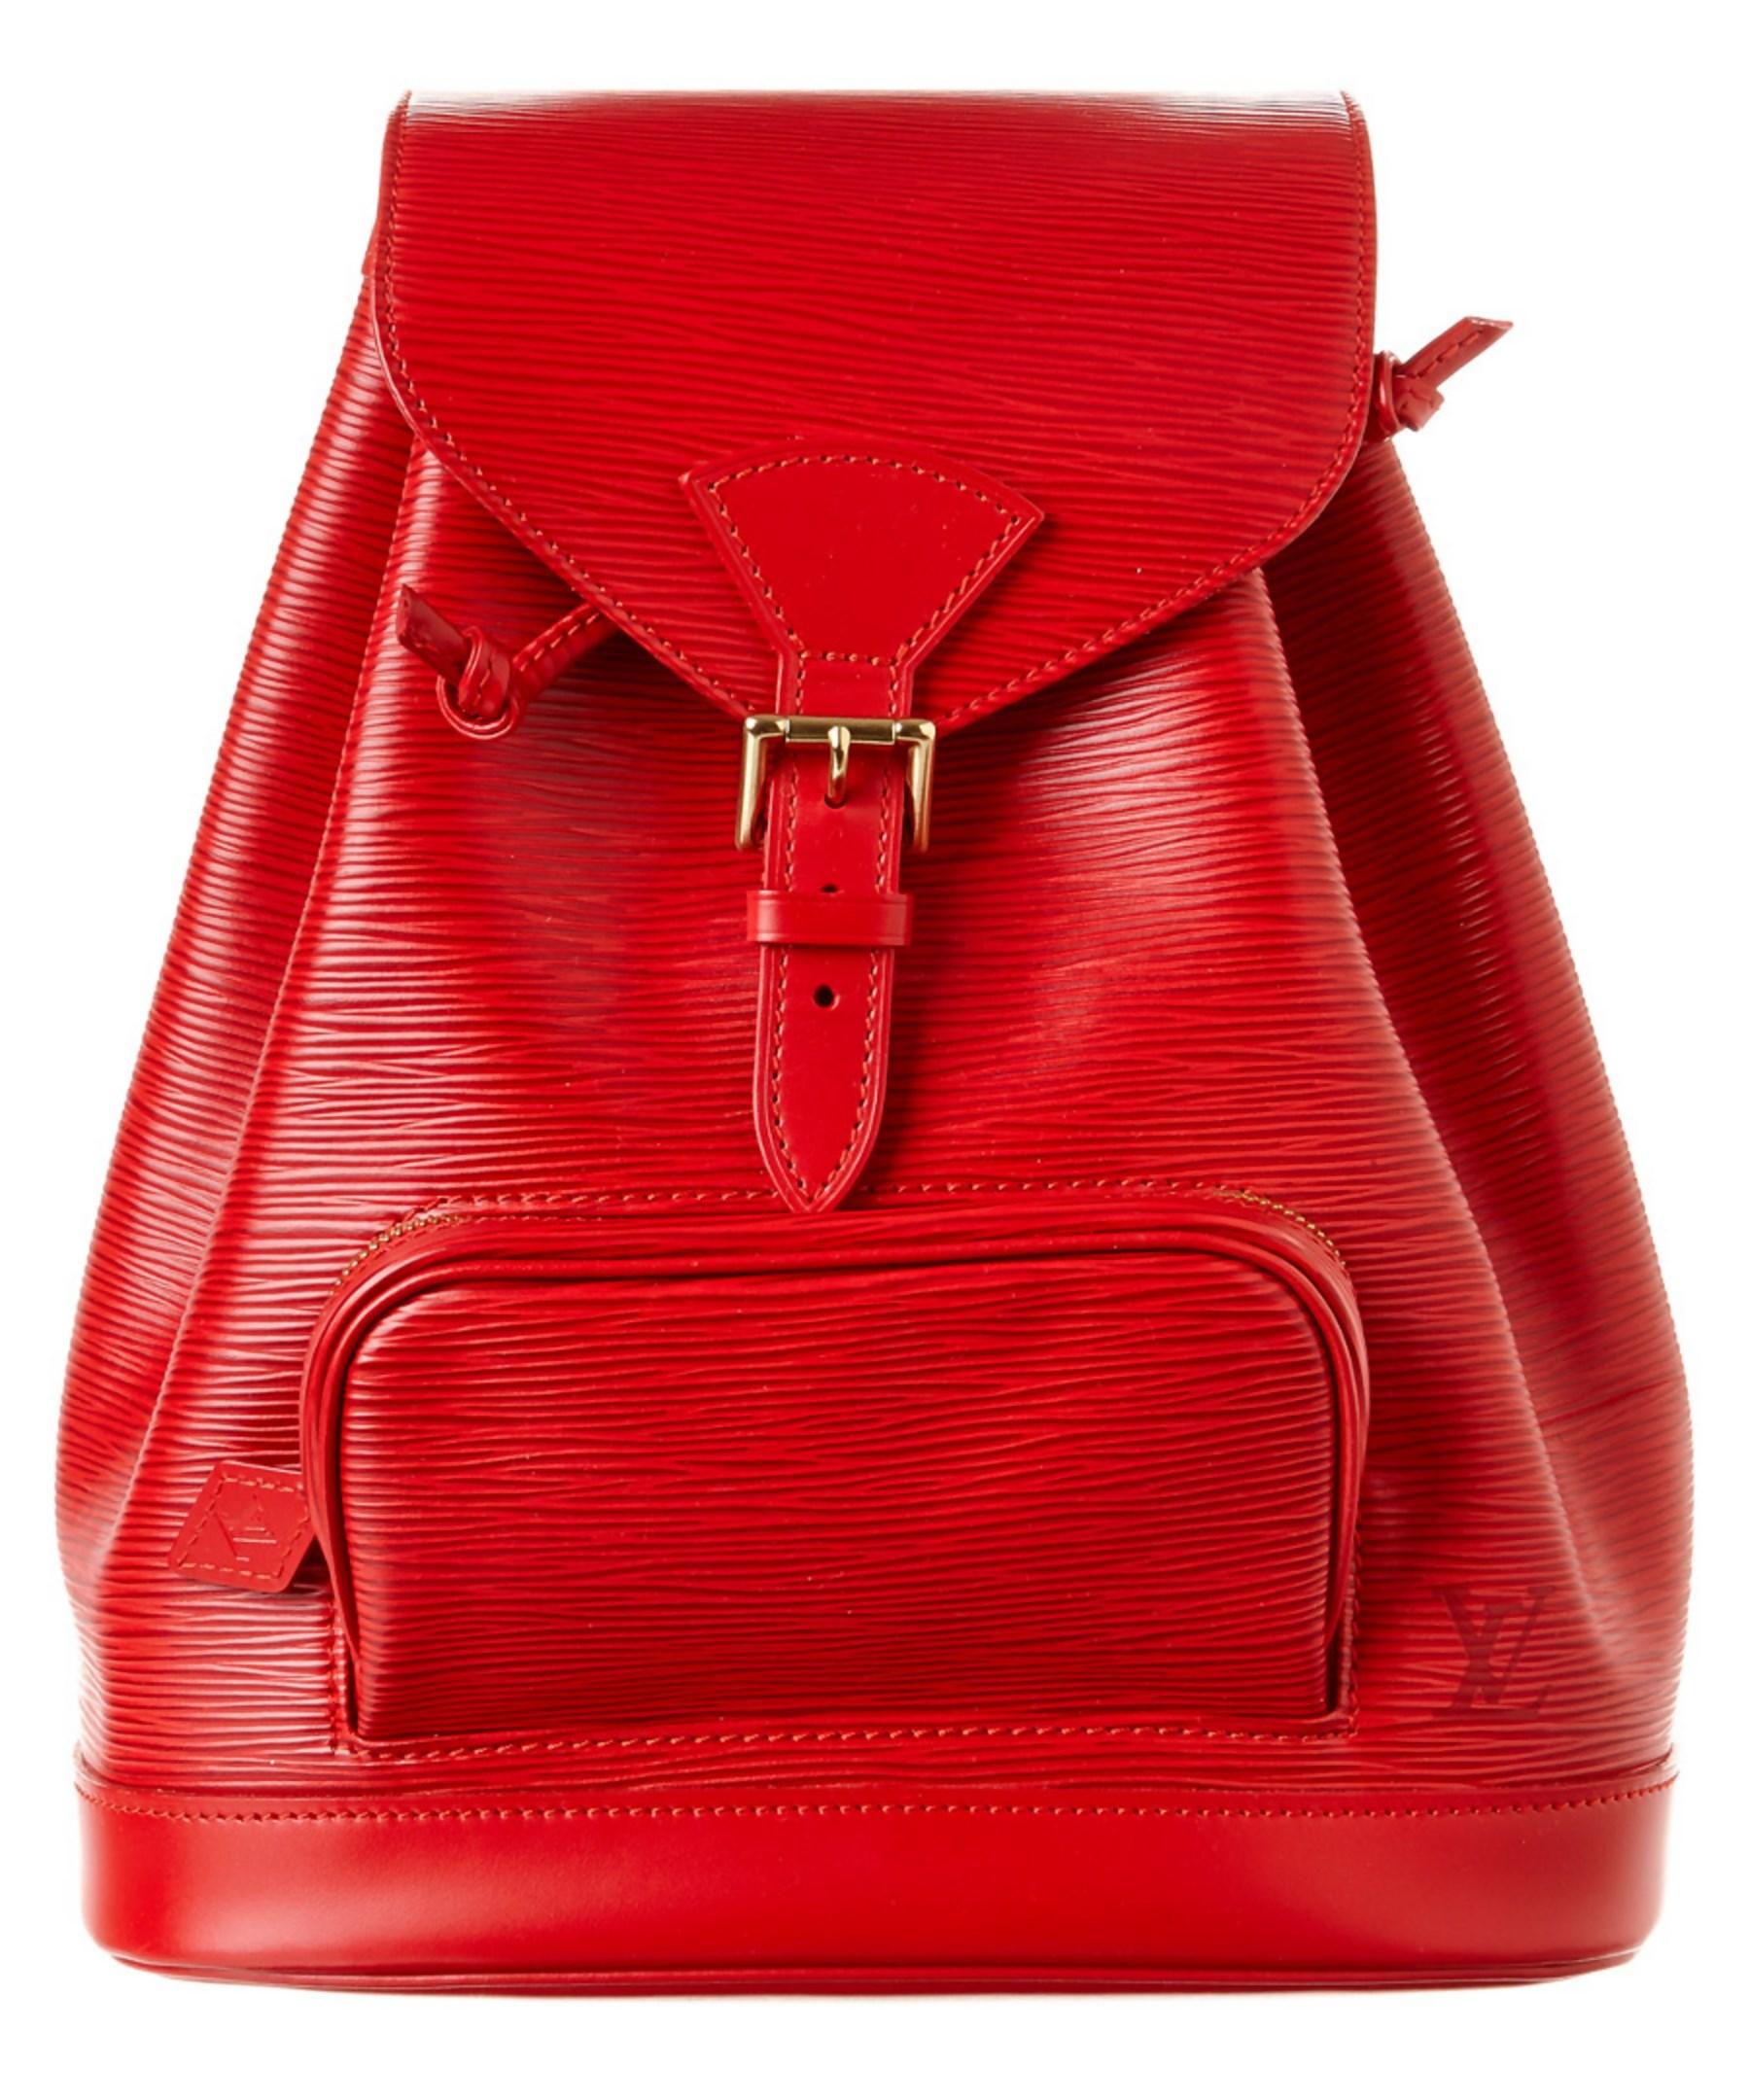 Lyst - Louis Vuitton Red Epi Leather Montsouris Mm Backpack in Red